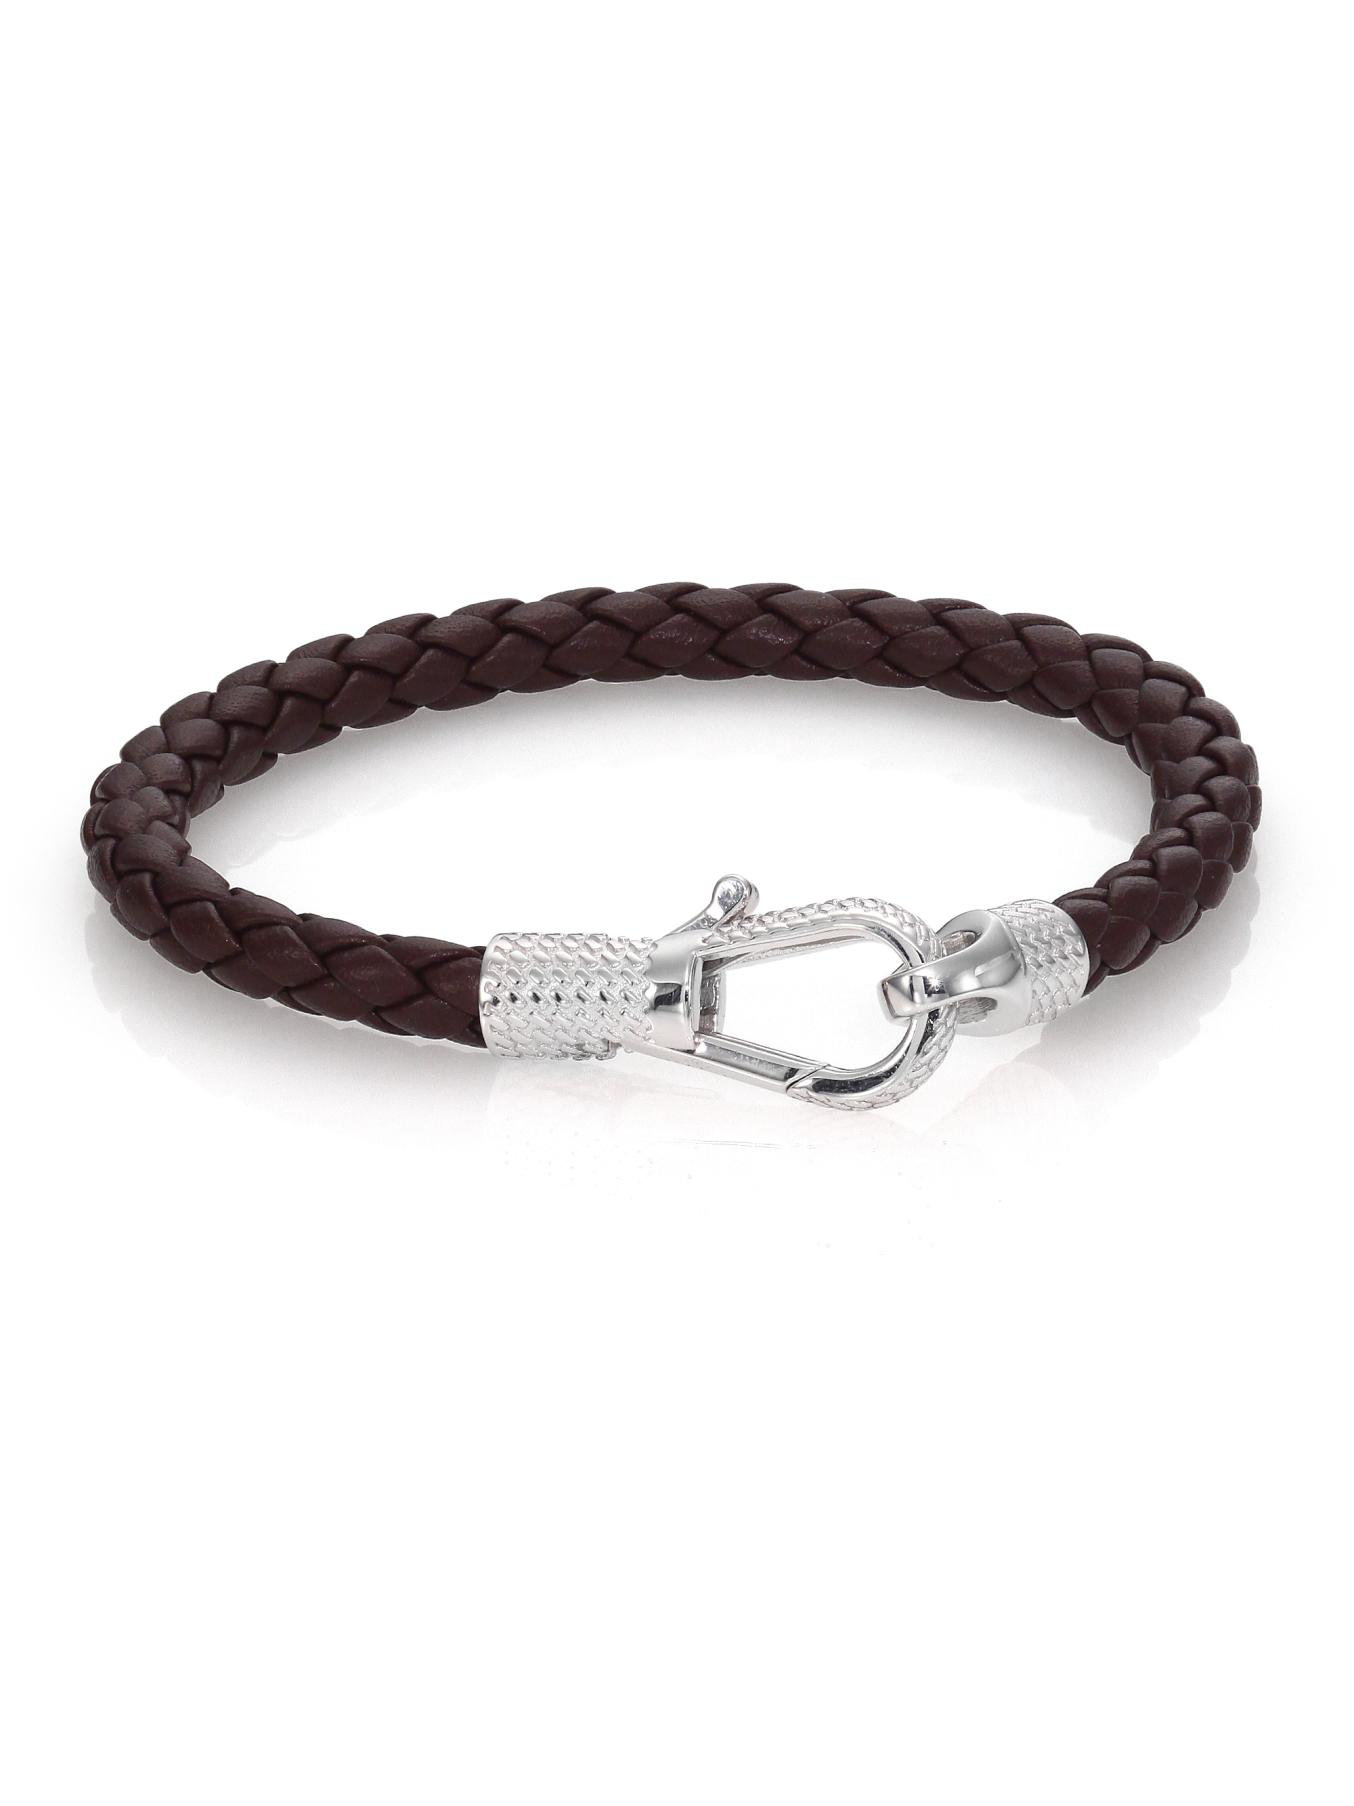 Tateossian Leather & Sterling Silver Braided Bracelet in Brown for Men ...